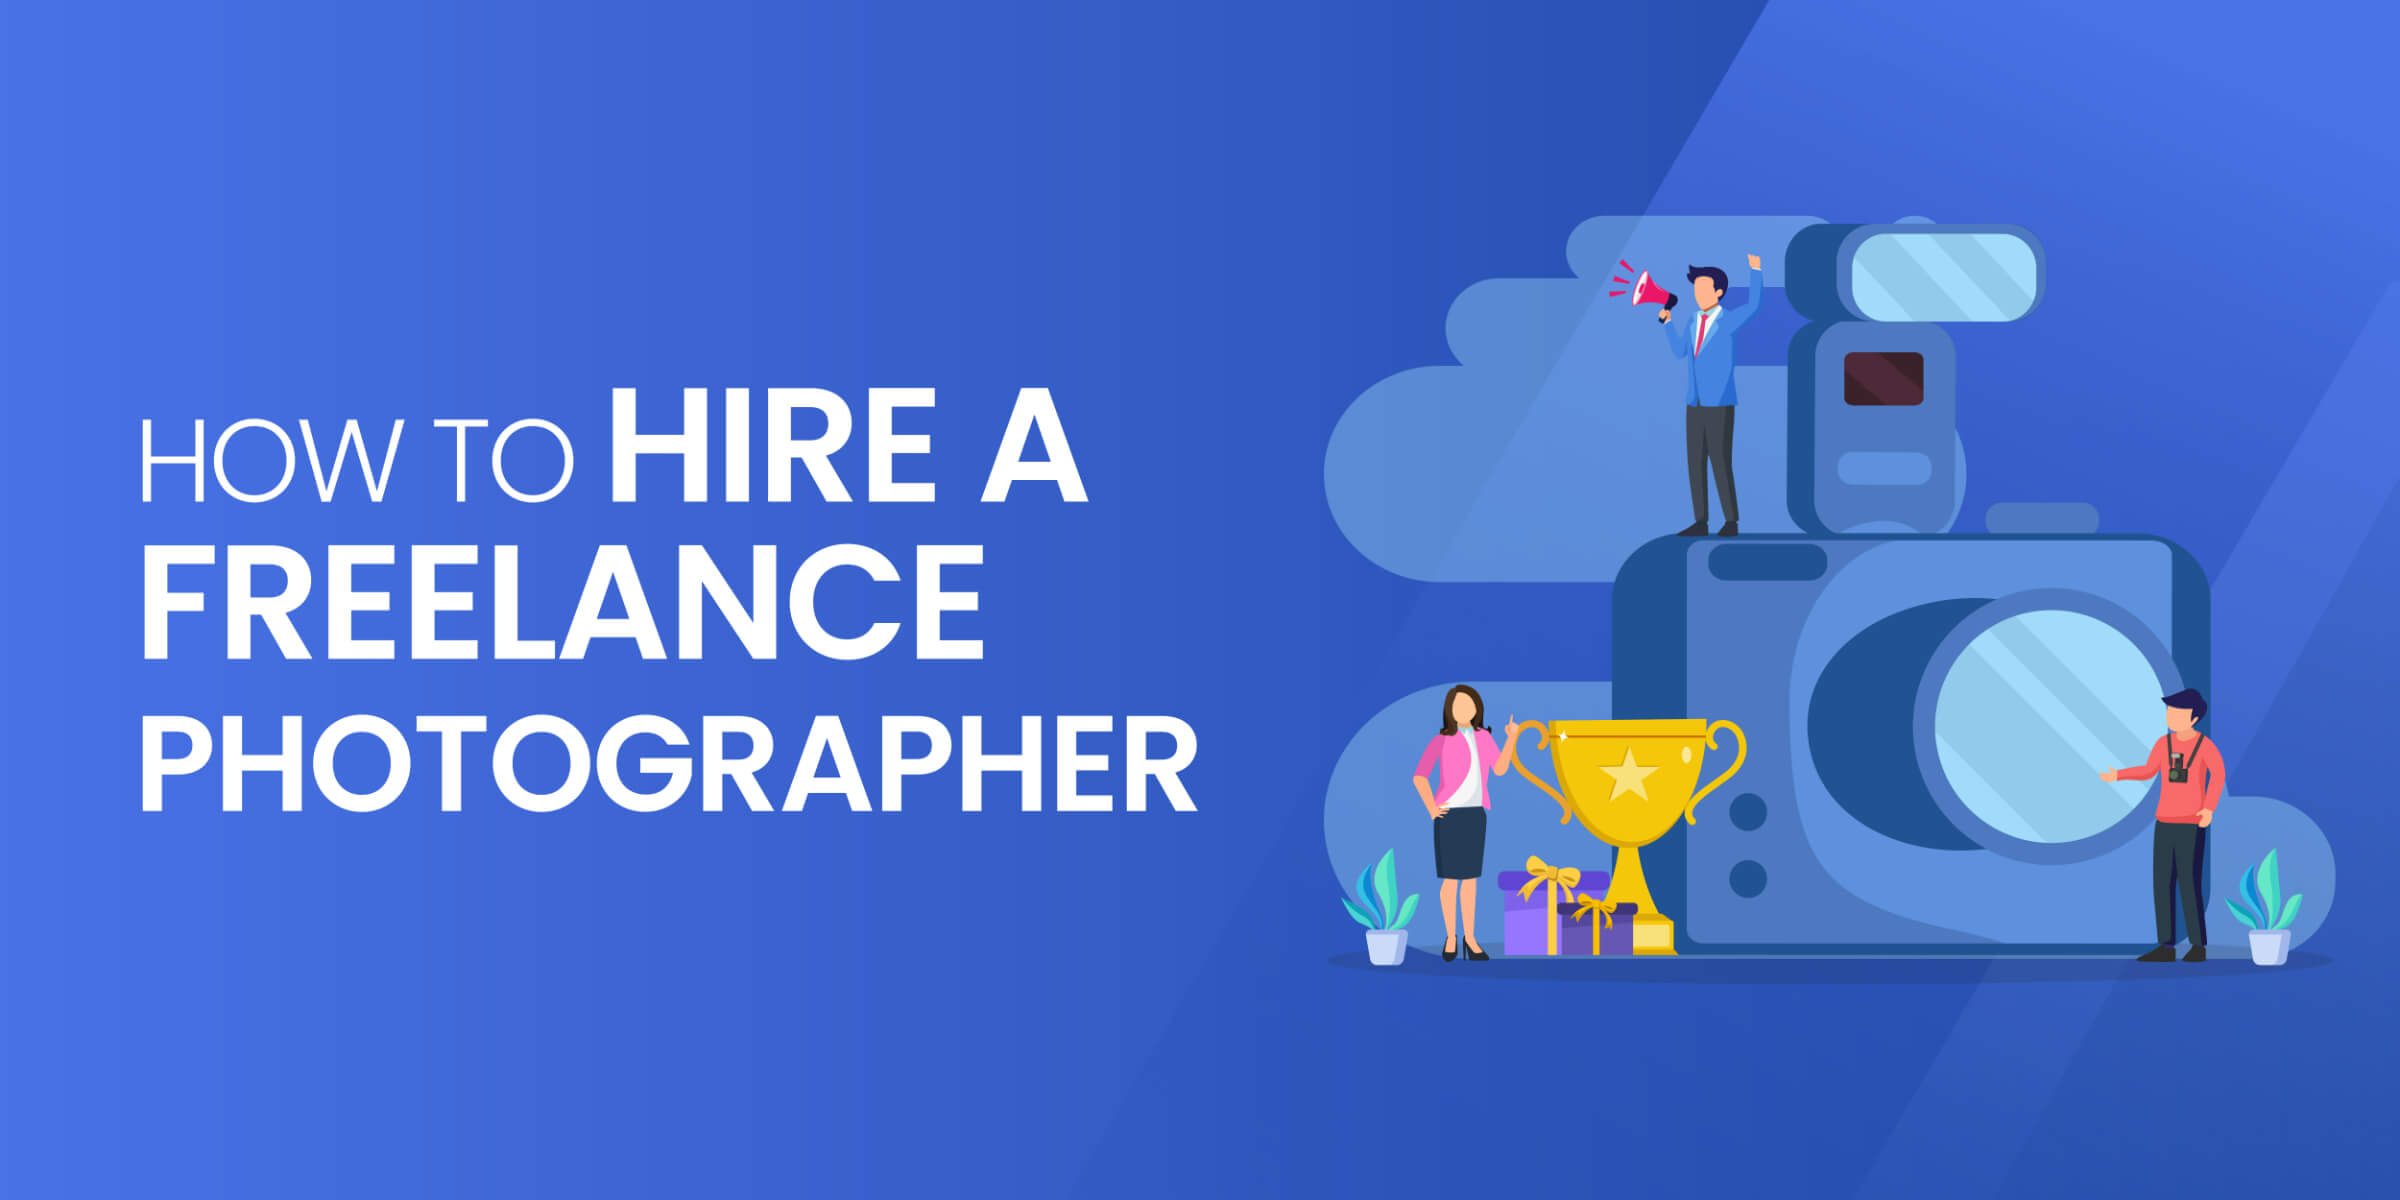 How to Hire a Freelance Photographer